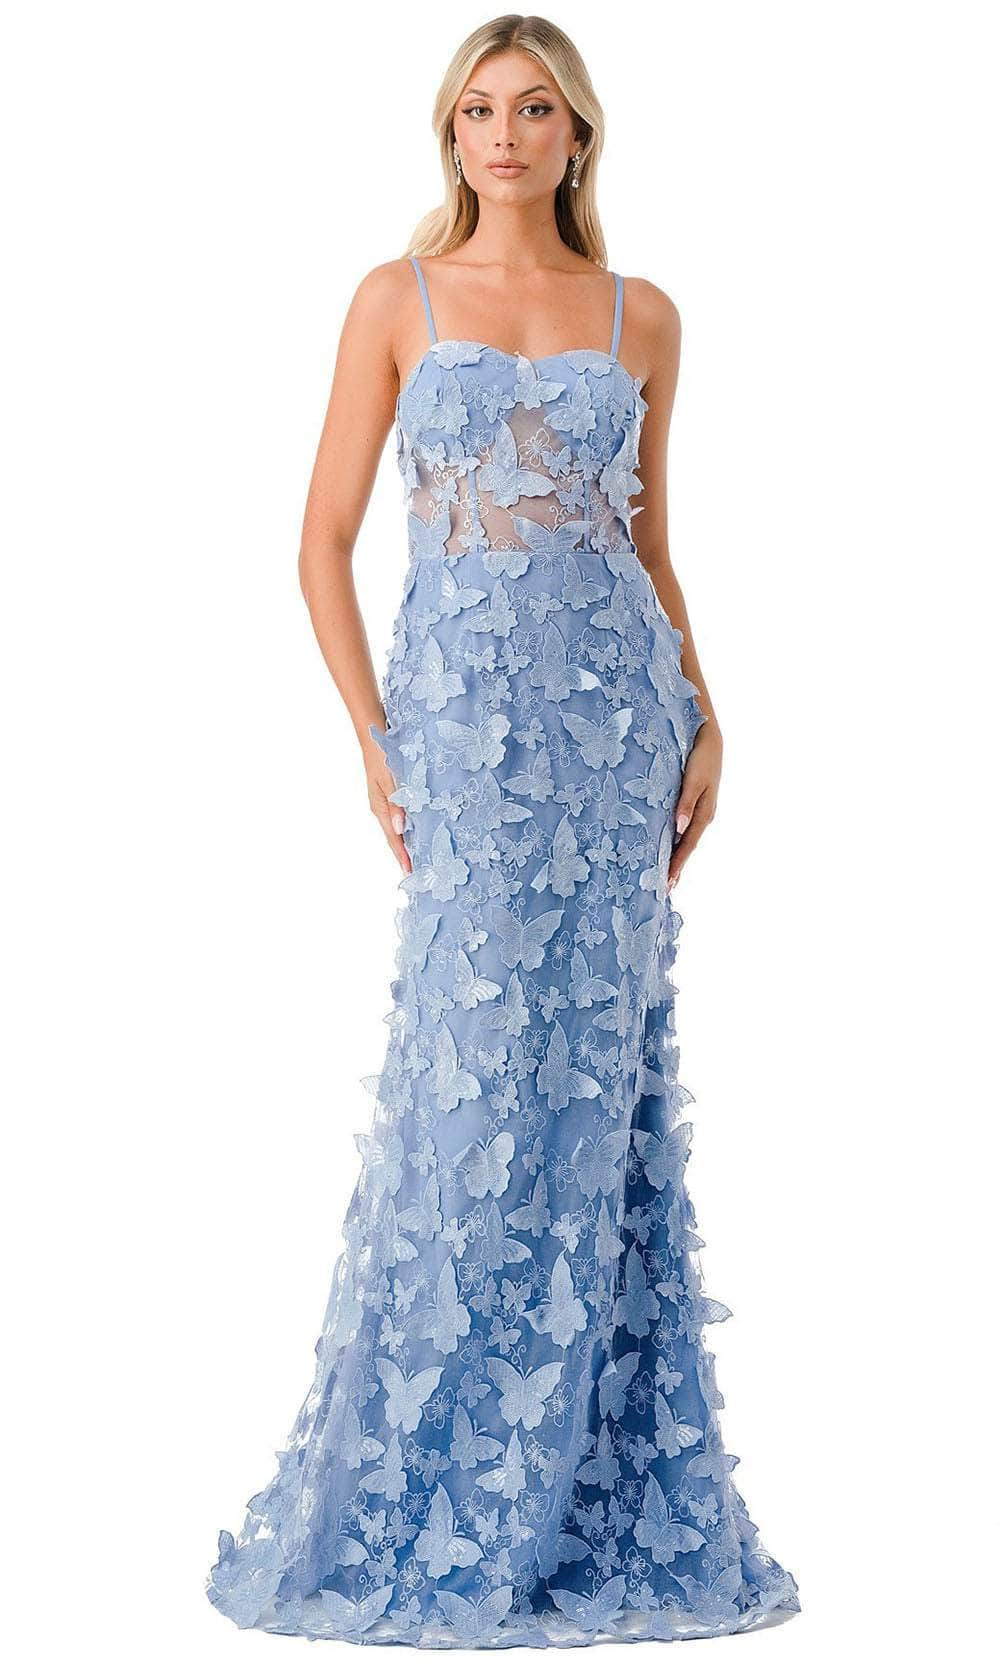 Image of Aspeed Design L2801F - Butterfly Applique Prom Dress